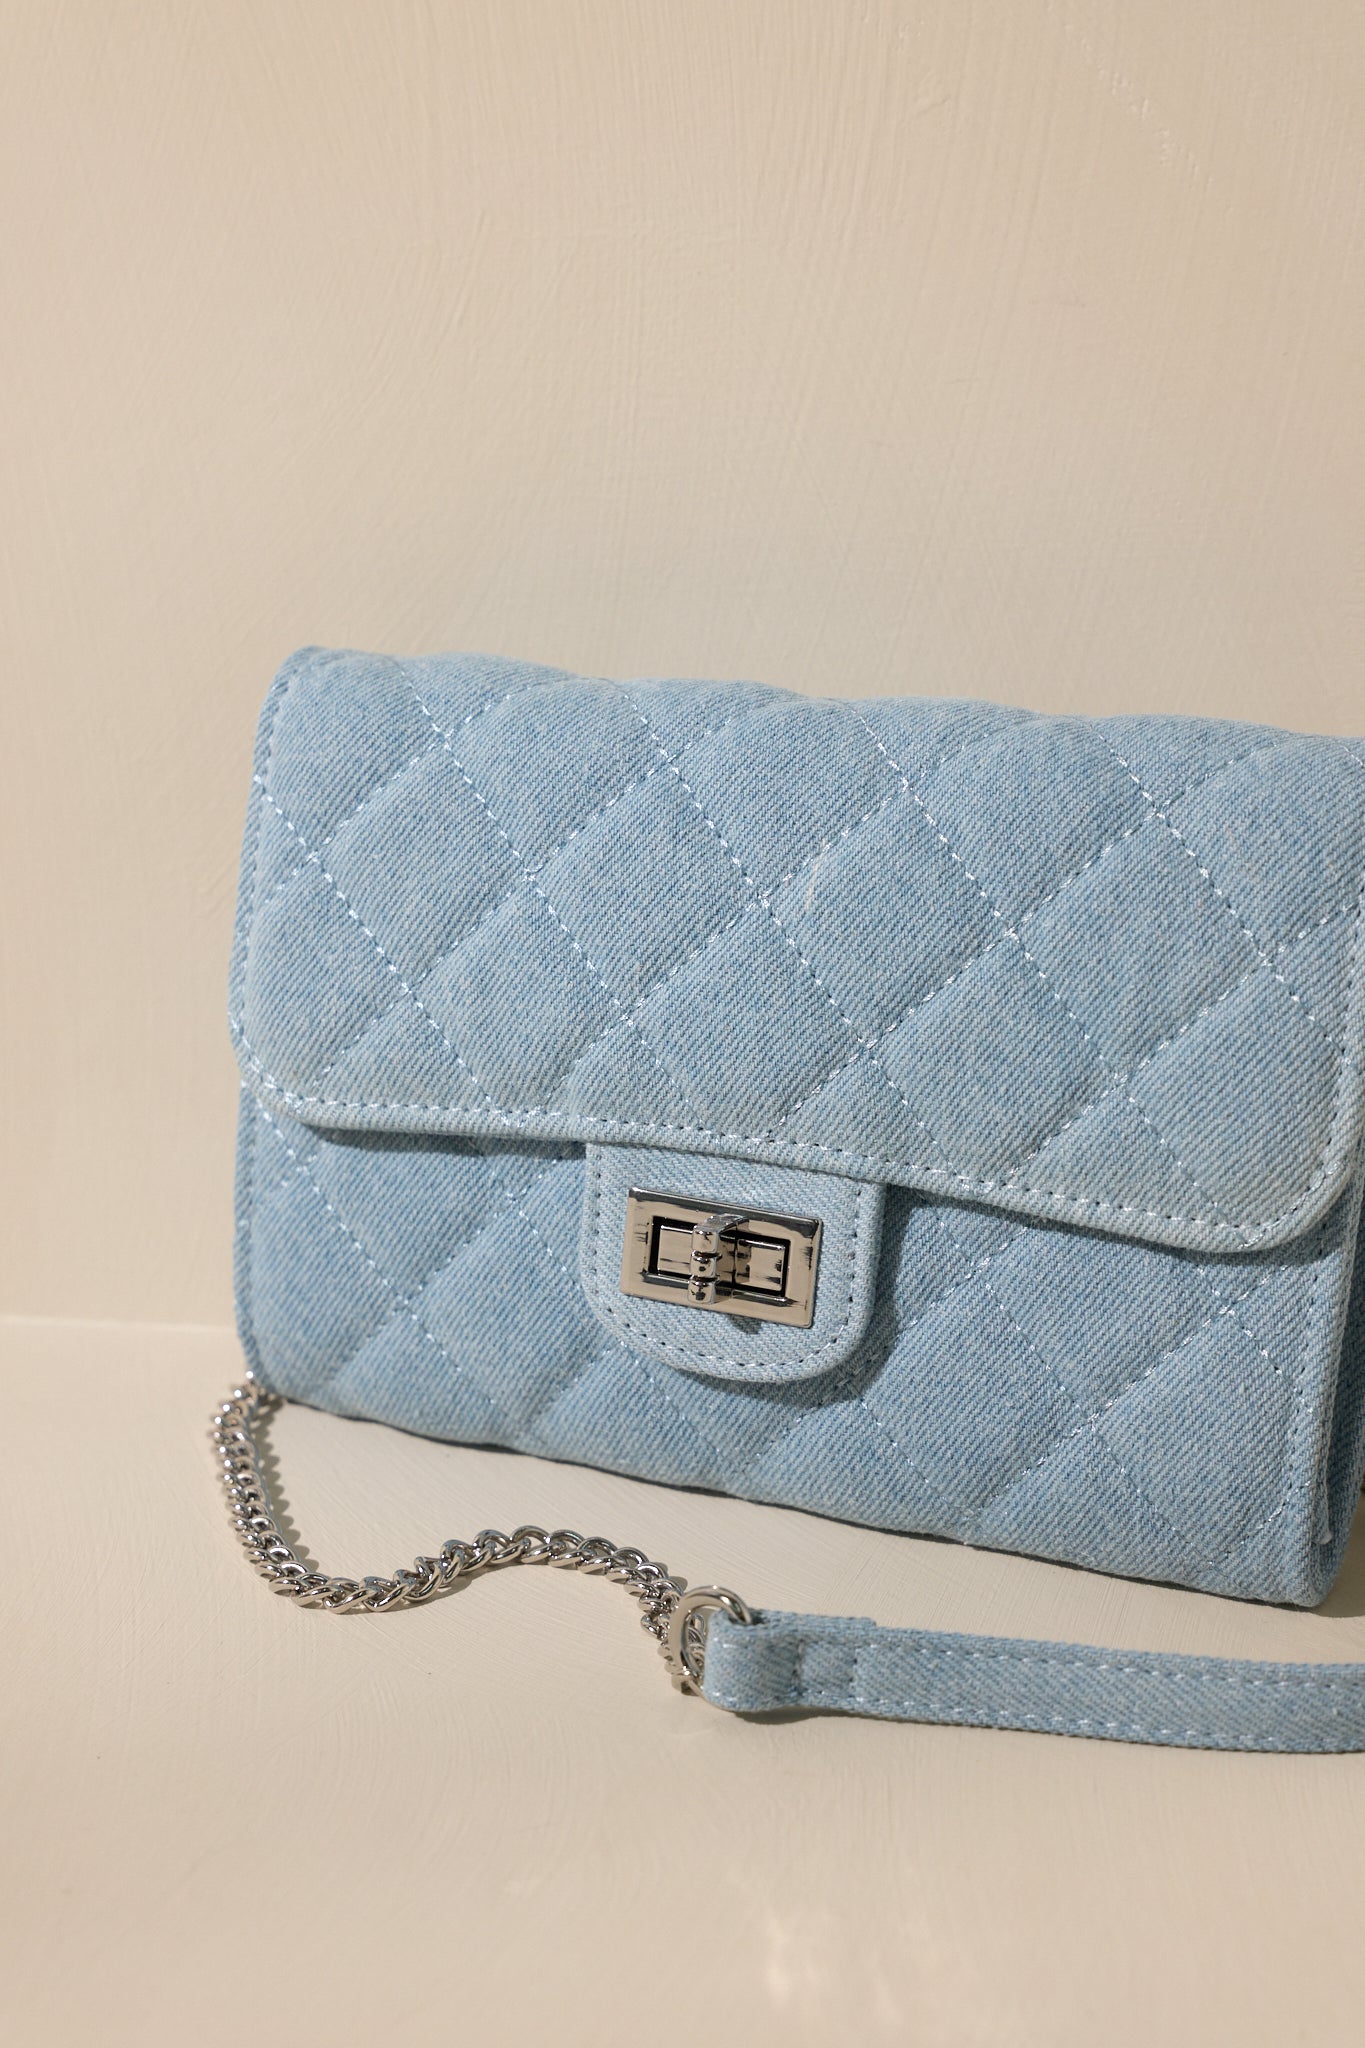 Close up view of this denim bag features silver hardware, a quilted design, turn lock closure, a zipper pocket inside, and a detachable chain shoulder strap.